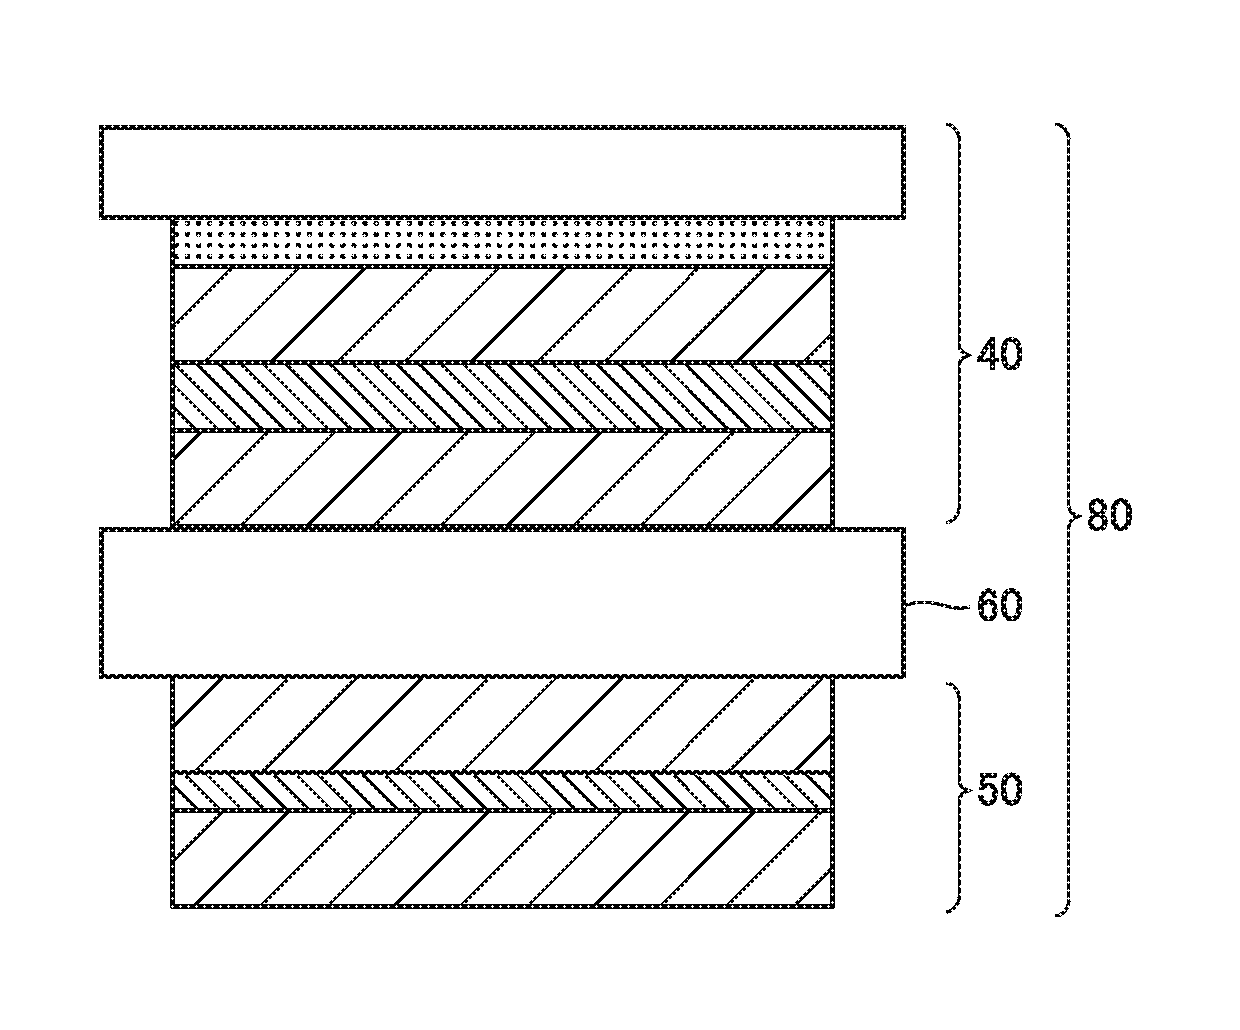 Set of polarizing plates and front-plate-integrated liquid crystal display panel